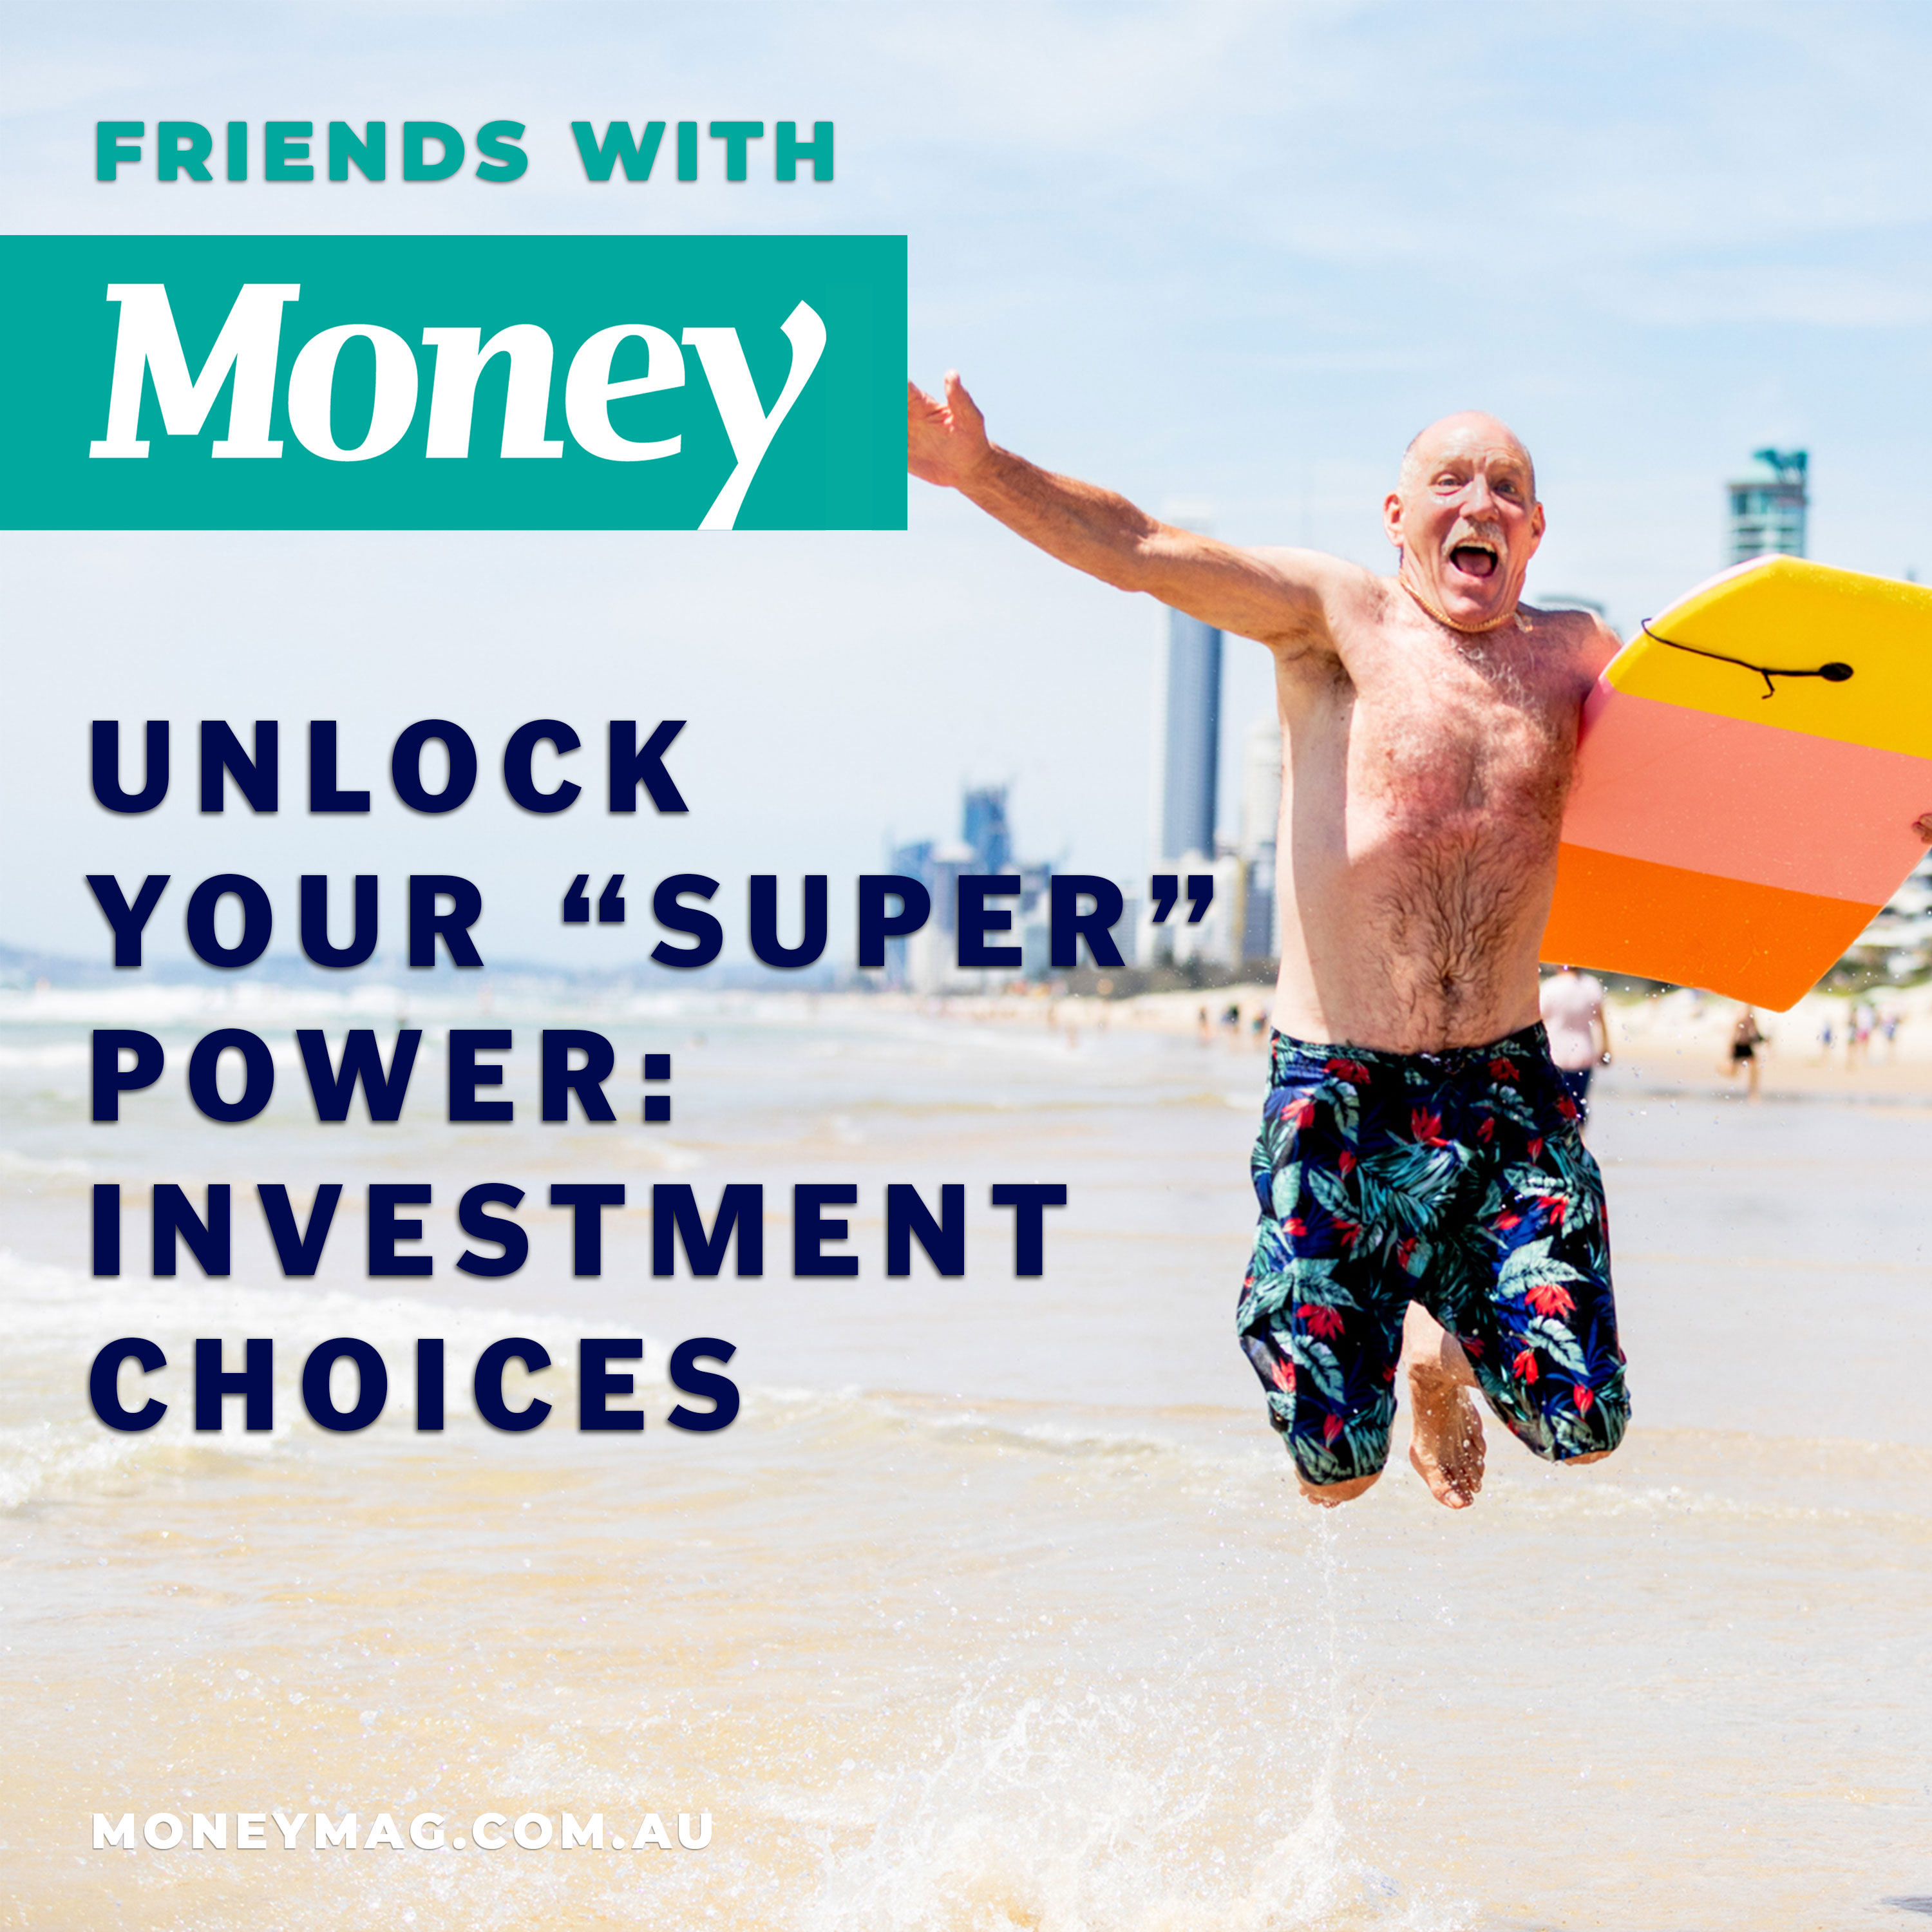 Unlock your "super" power: Investment choices